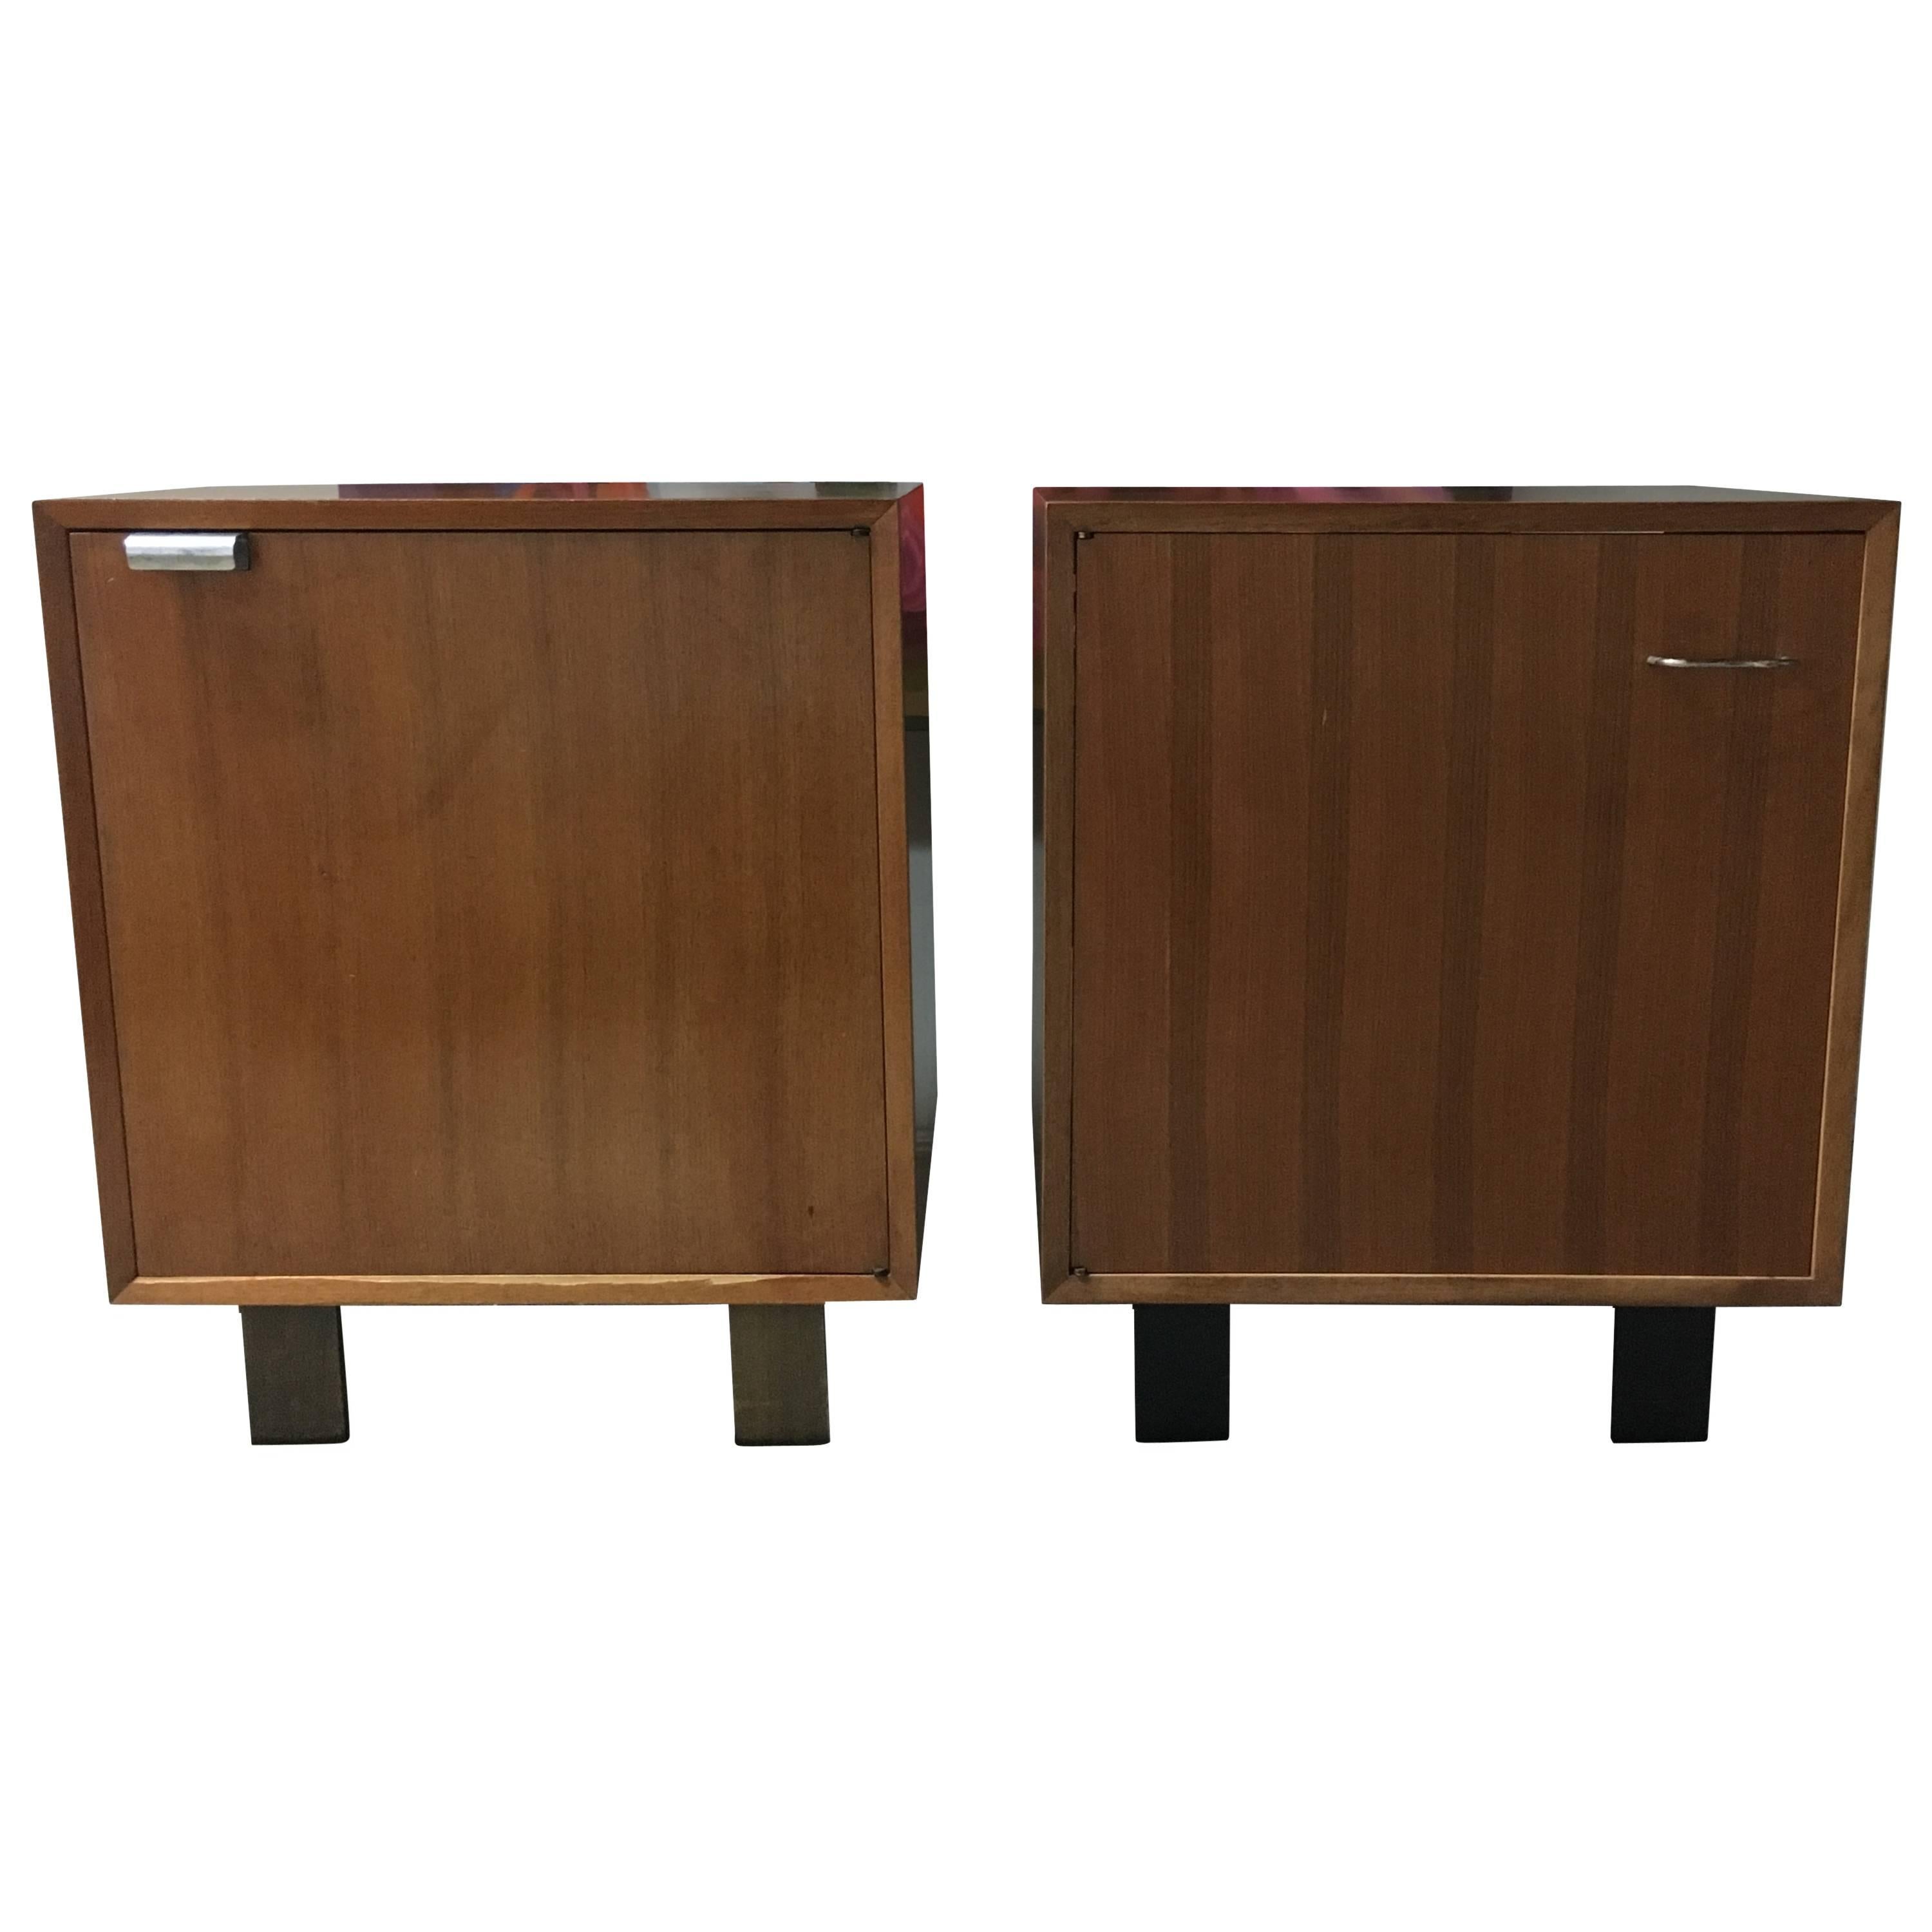 George Nelson Pair of Walnut Cabinets for Herman Miller, 1948